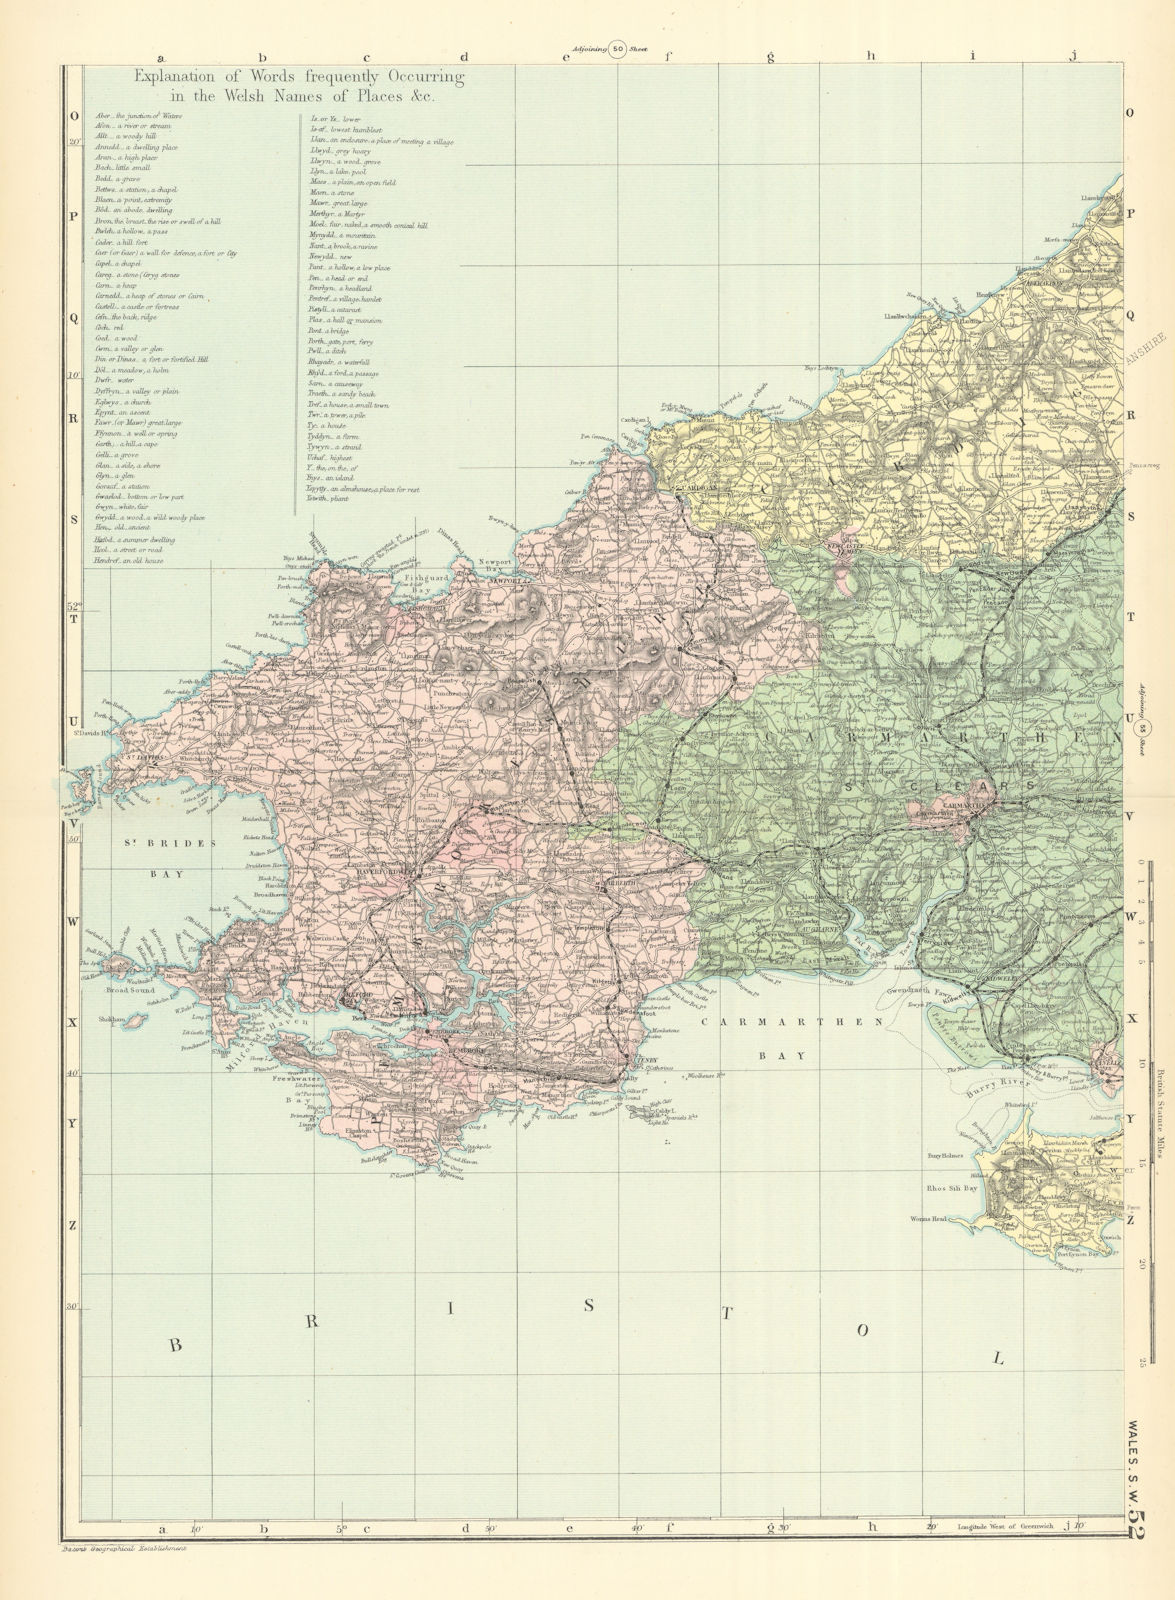 WALES (South West) Pembrokeshire Camarthenshire Dyfed GW BACON 1891 old map